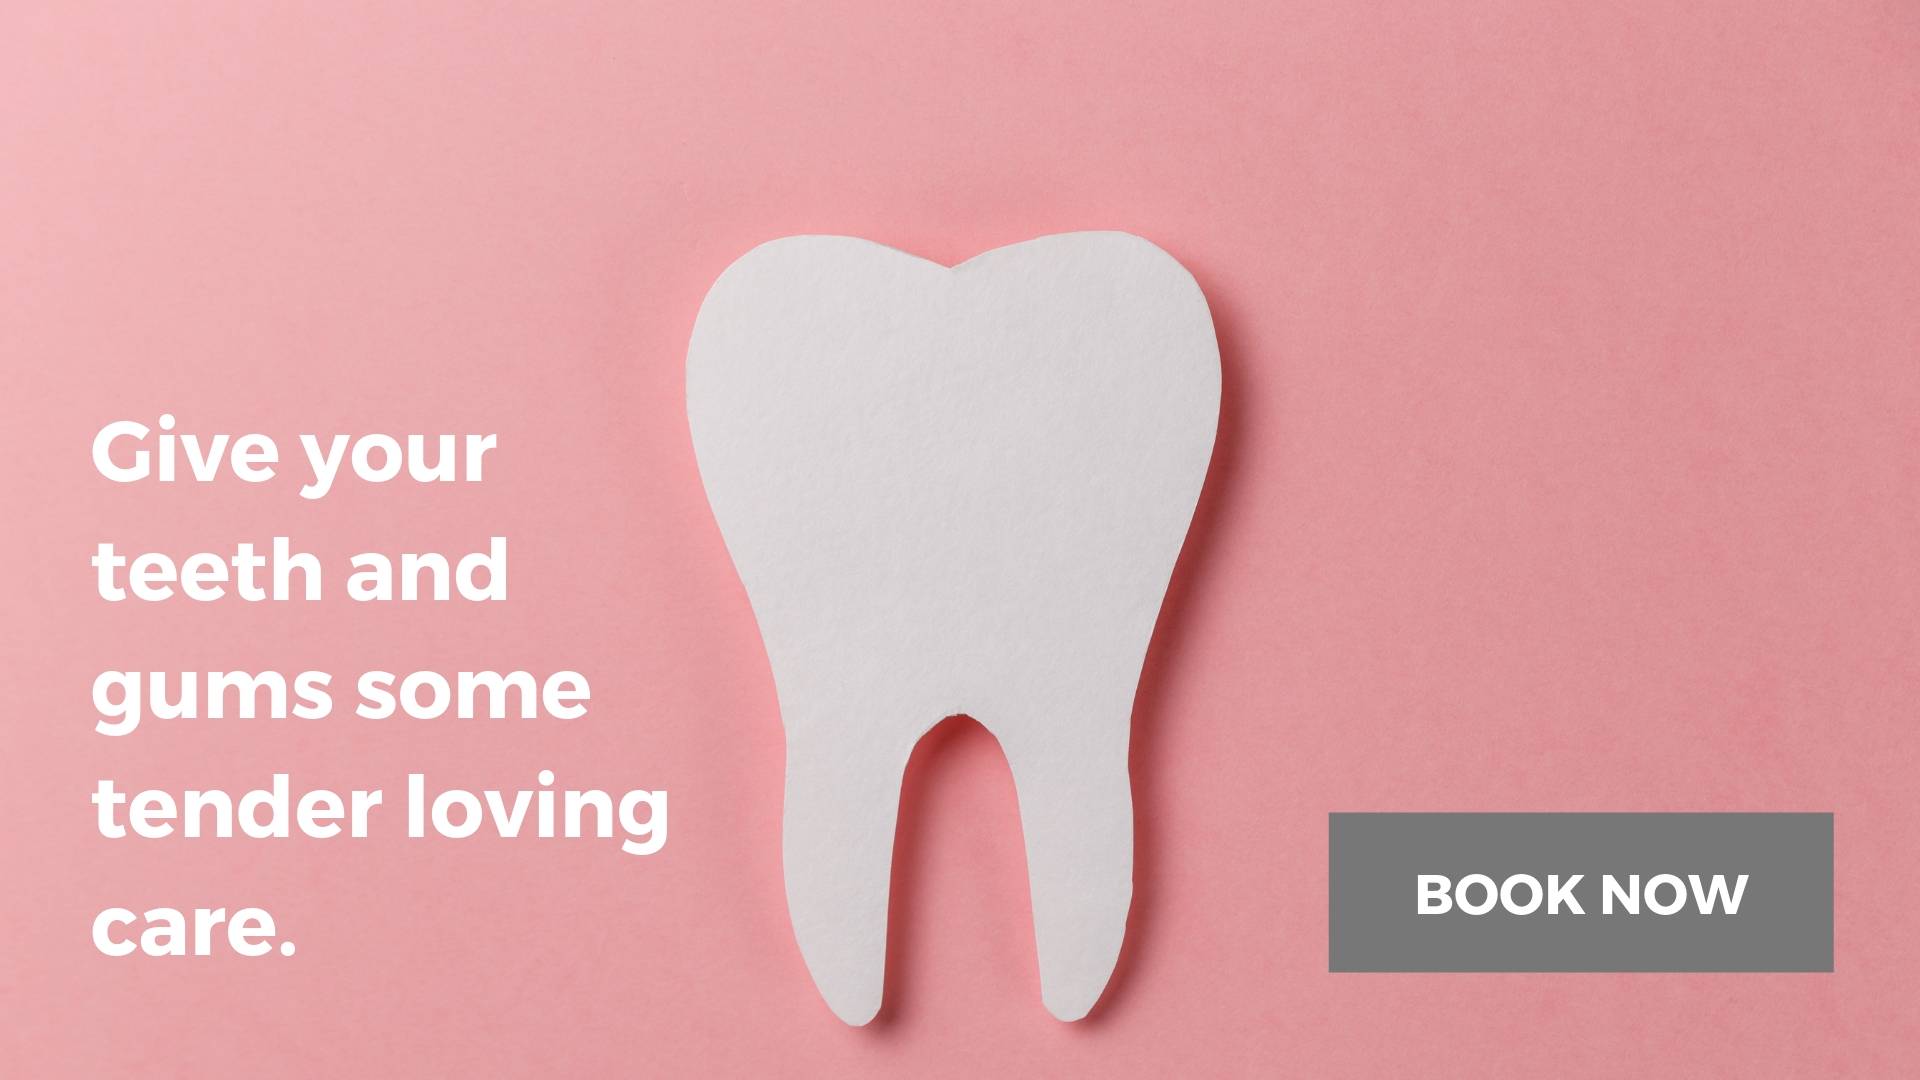 A stylised tooth asking people to book an appointment if they need some gum care